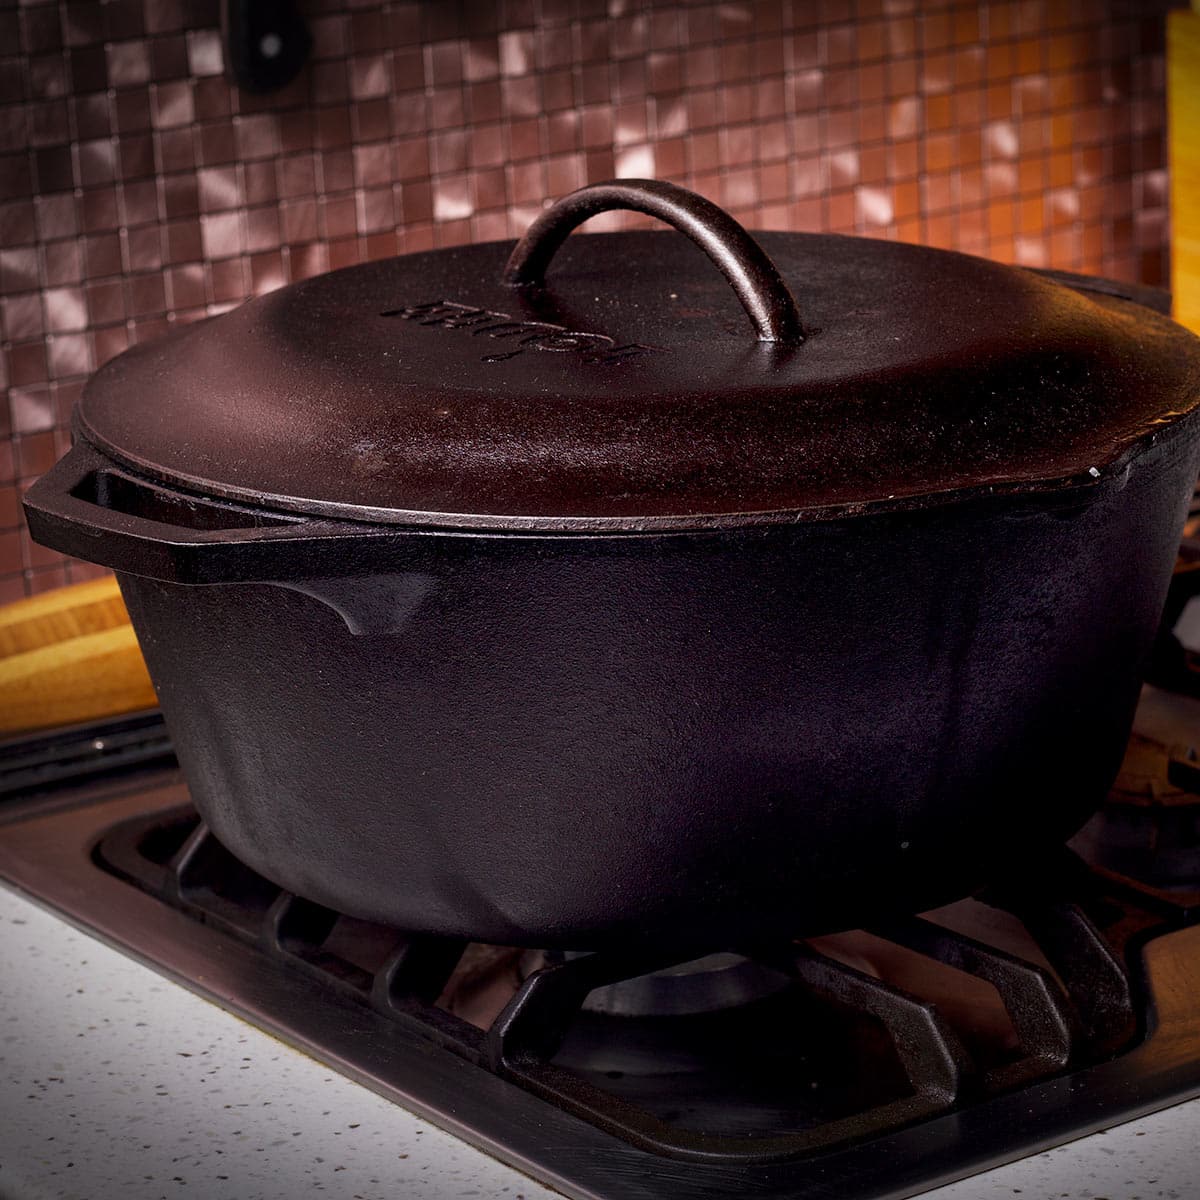 A cast iron Dutch oven on a stove top.